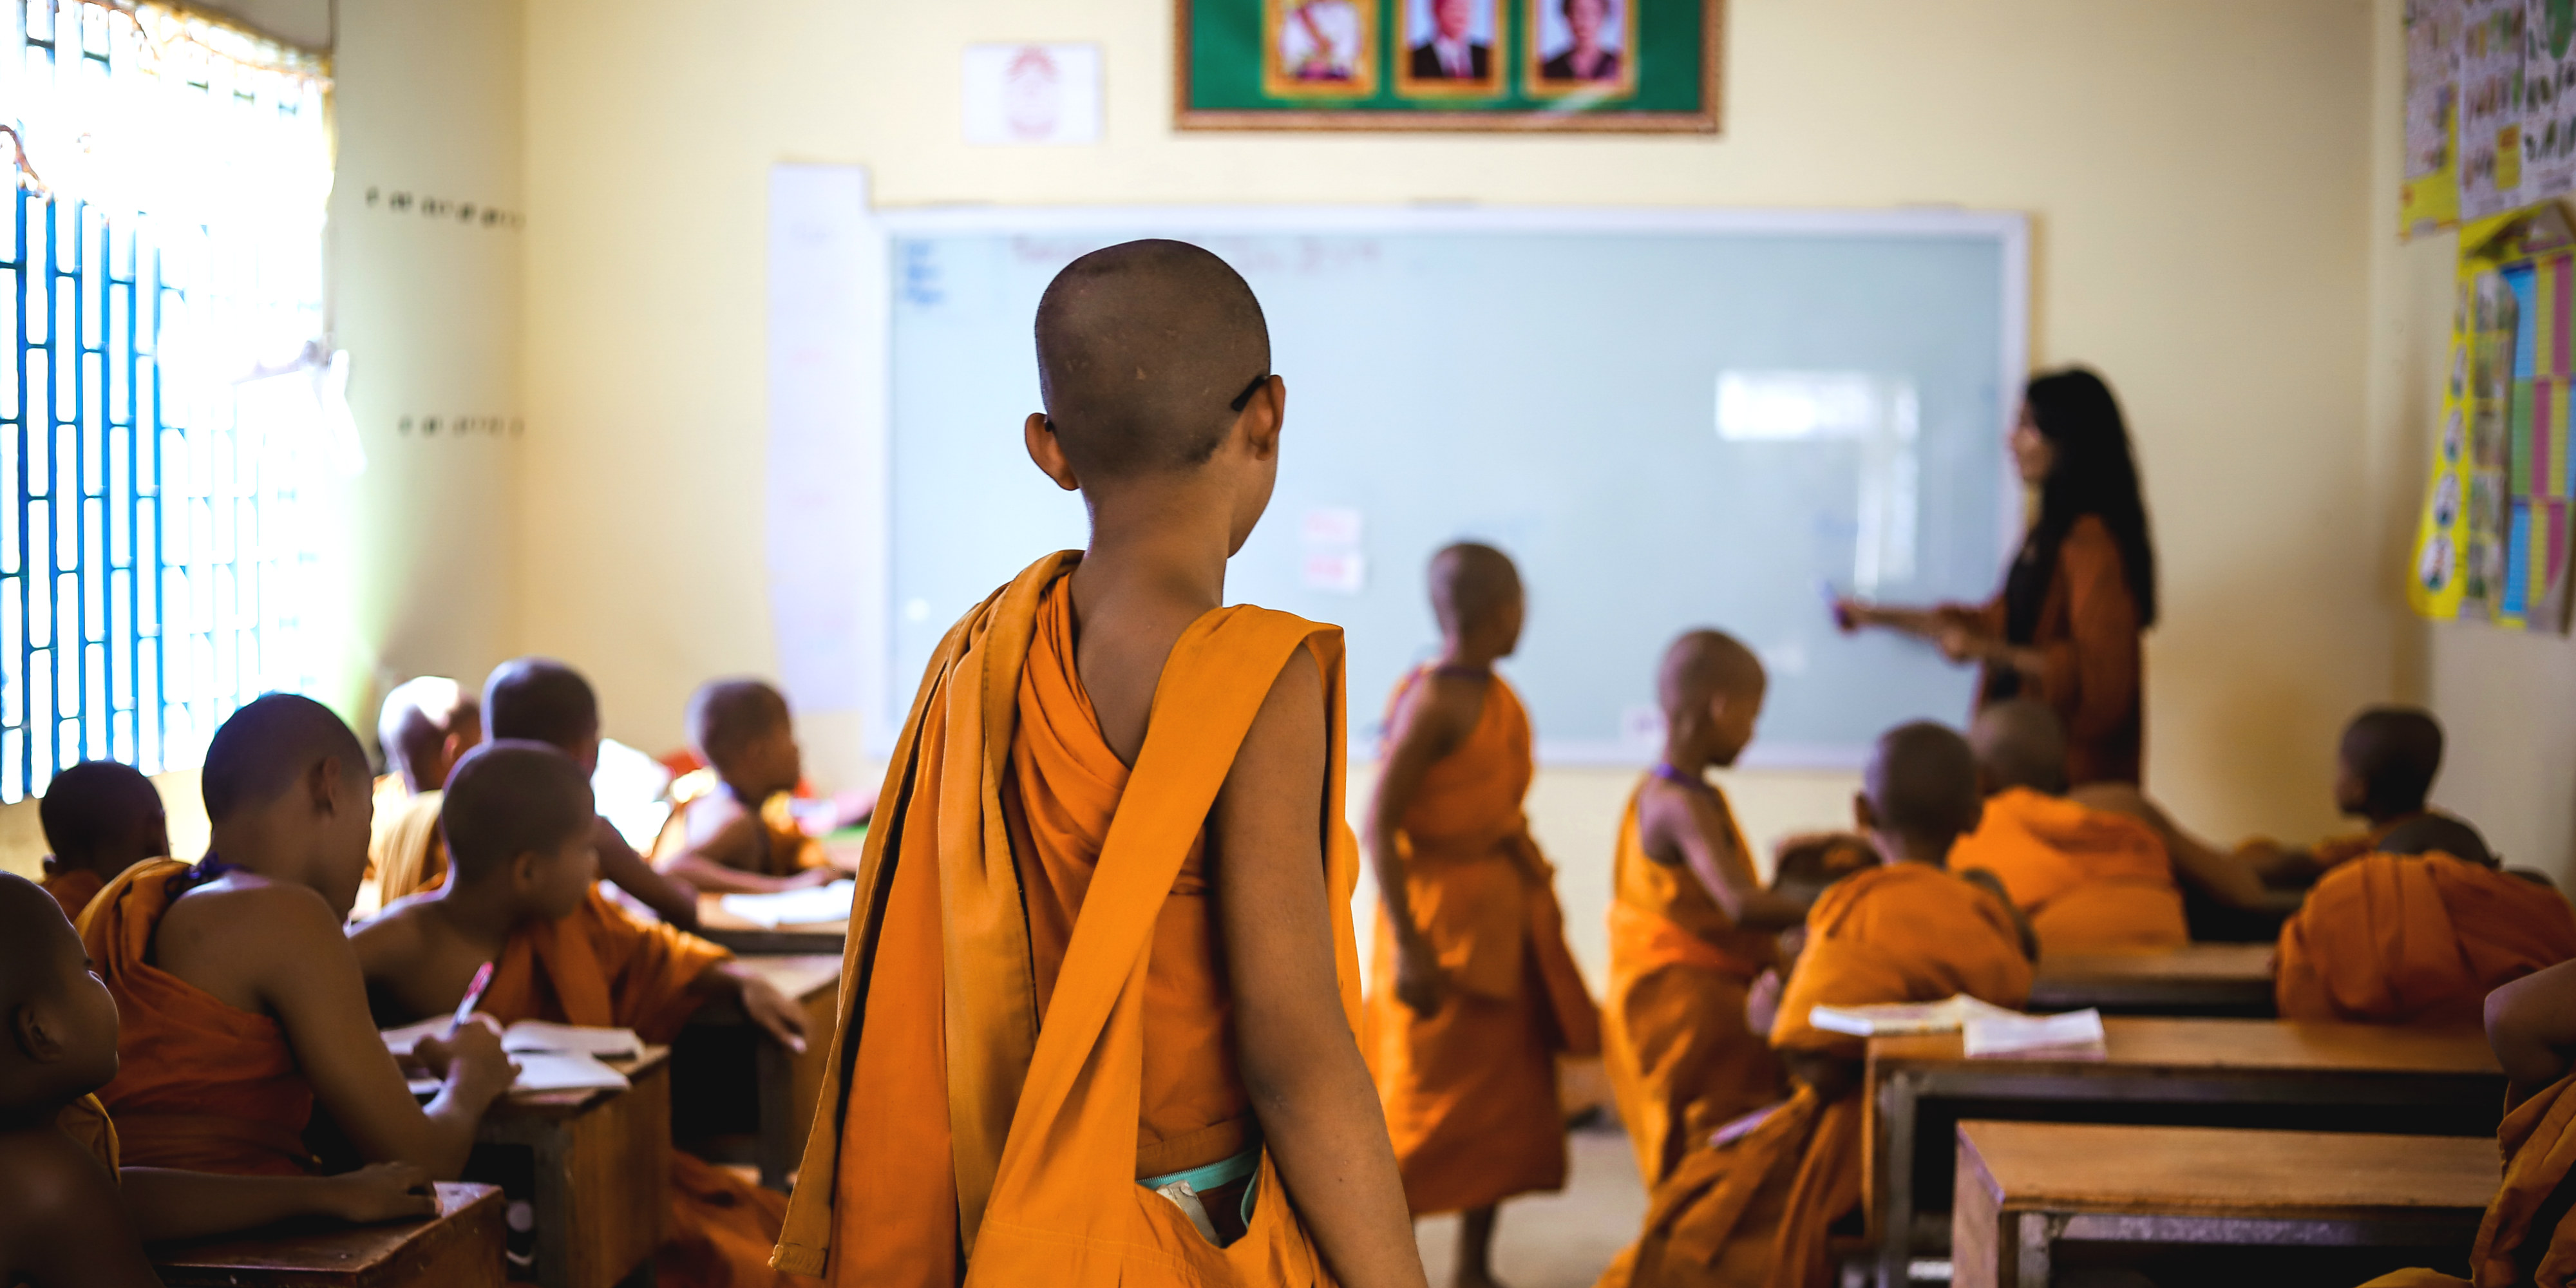 A novice monk enters an English lesson in Cambodia. This program, which is one of the best volunteer abroad programs for adults, seeks to increase educational capacity in Kampong Cham.